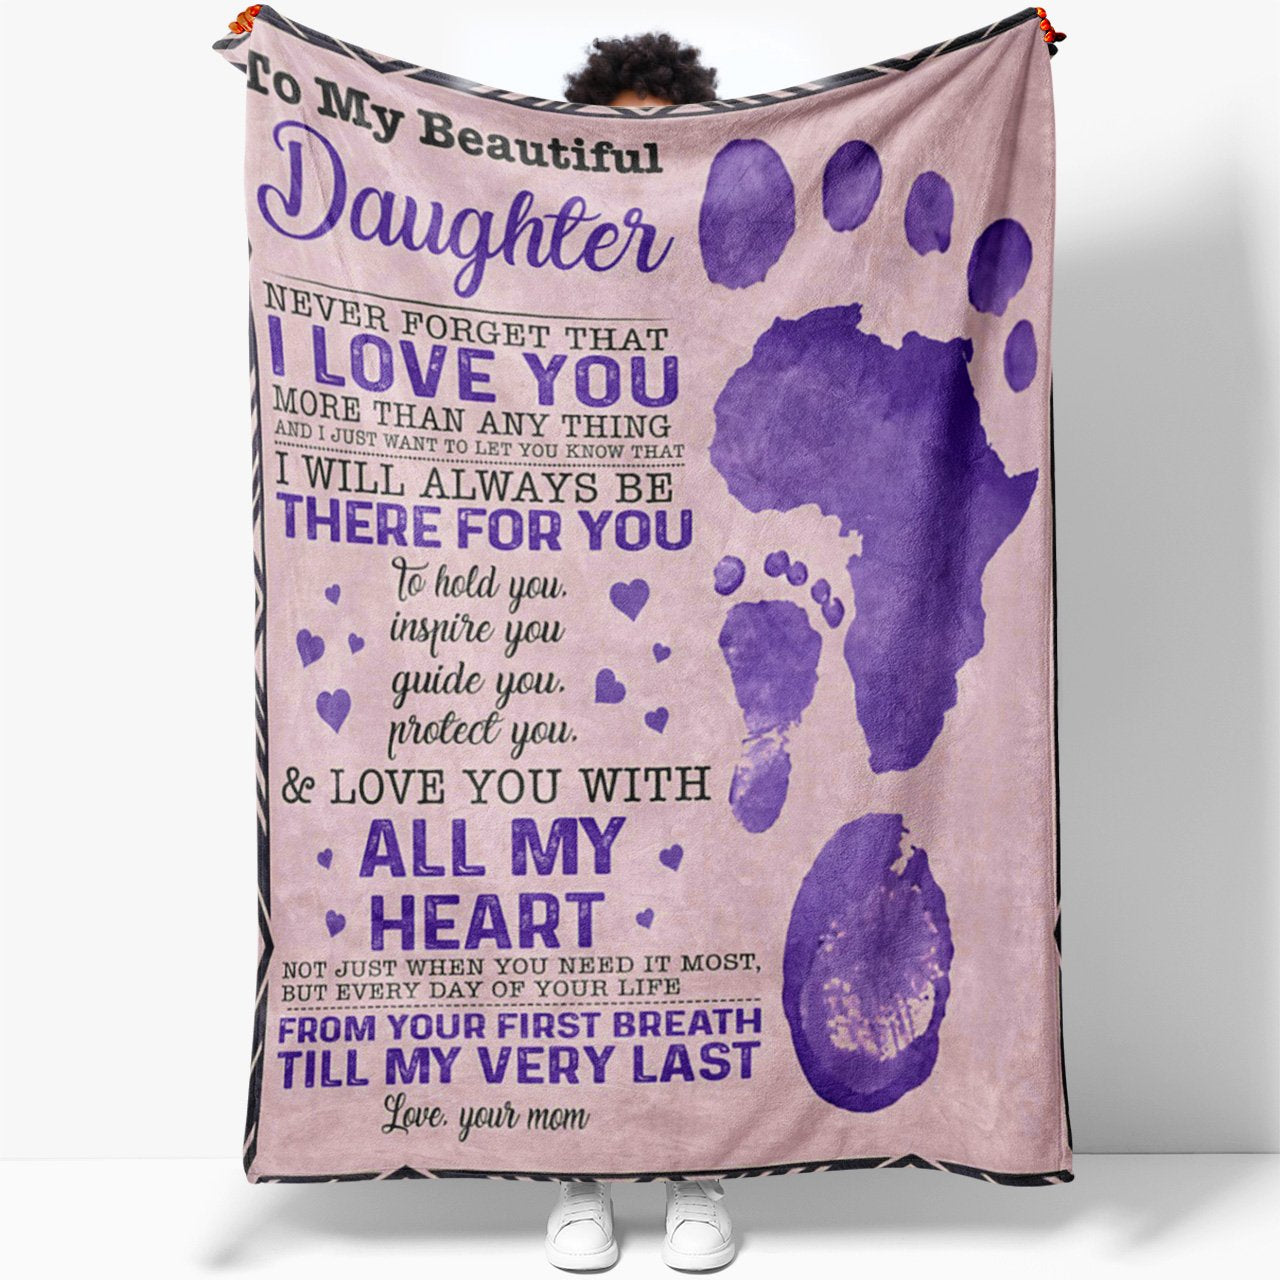 Blanket Gift Ideas To My Beautiful Daughter, Never Forget That I Love You Blanket From Mom, Best Birthday Christmas Thoughtful Gifts For Daughter